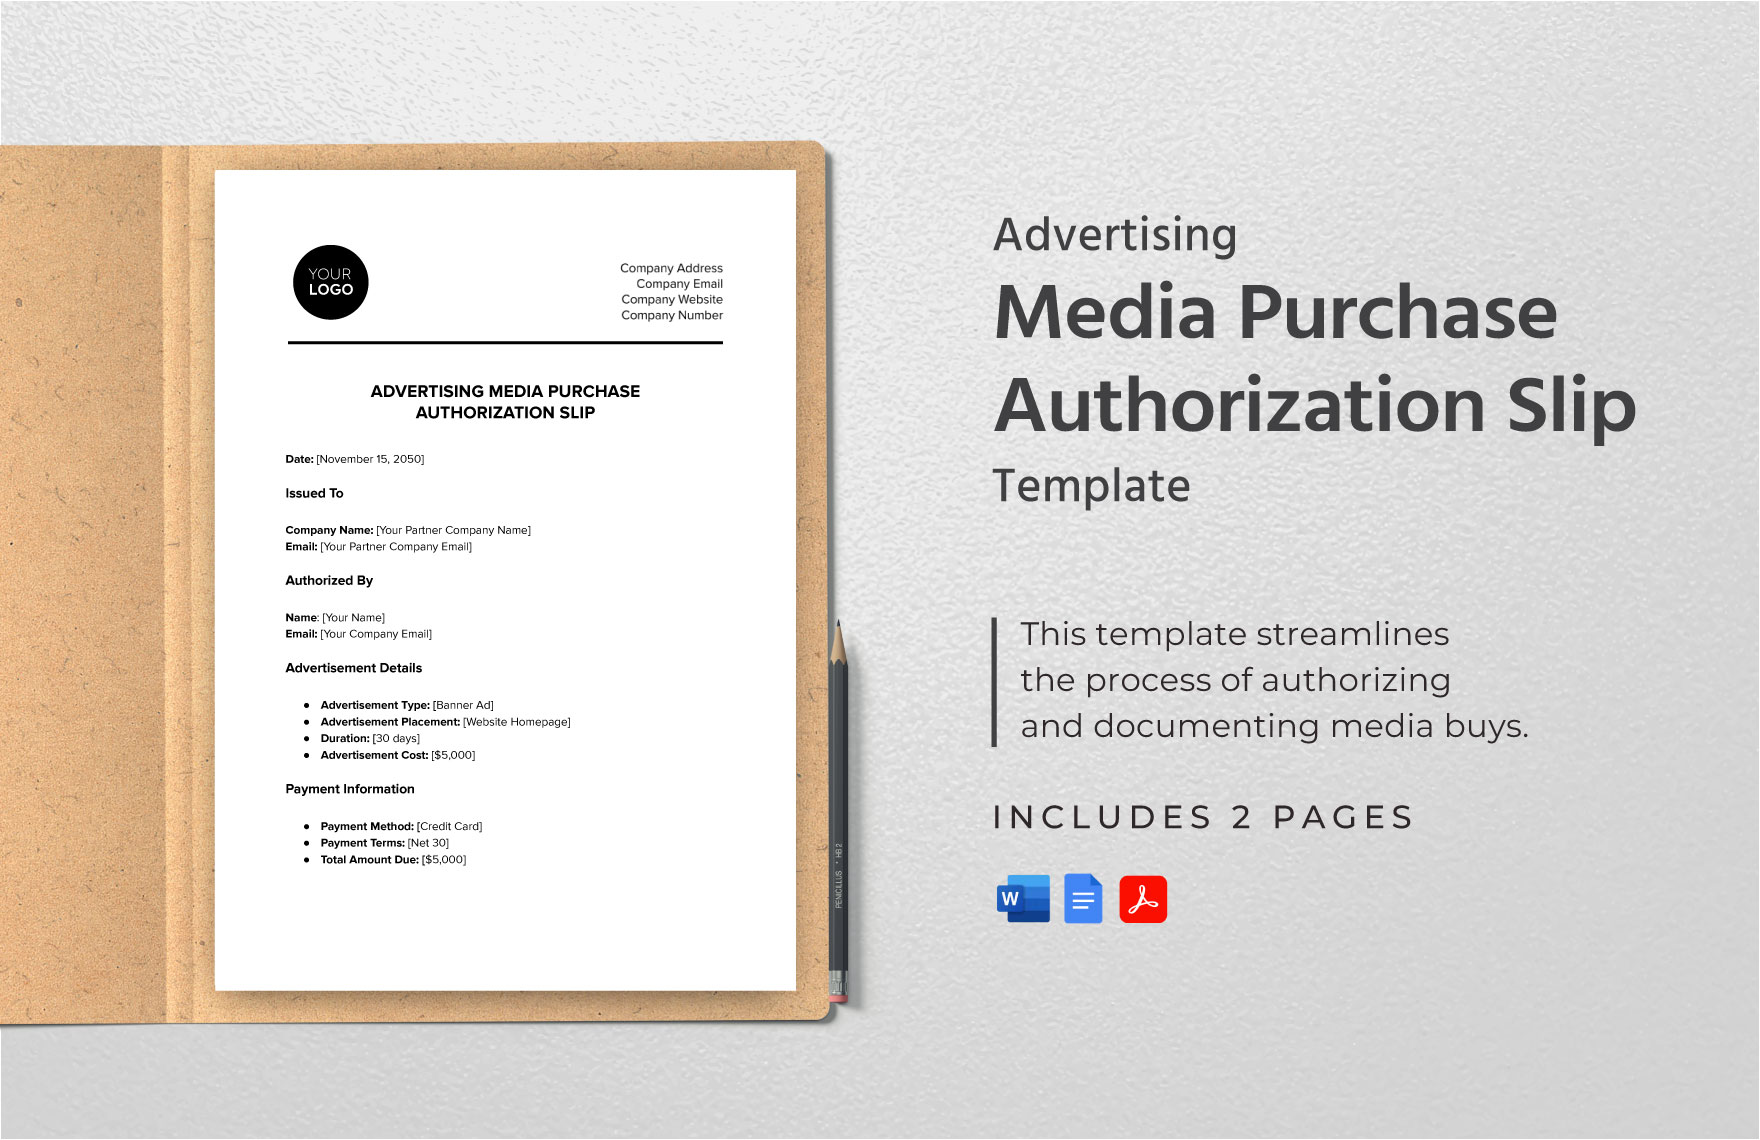 Advertising Media Purchase Authorization Slip Template in Word, Google Docs, PDF